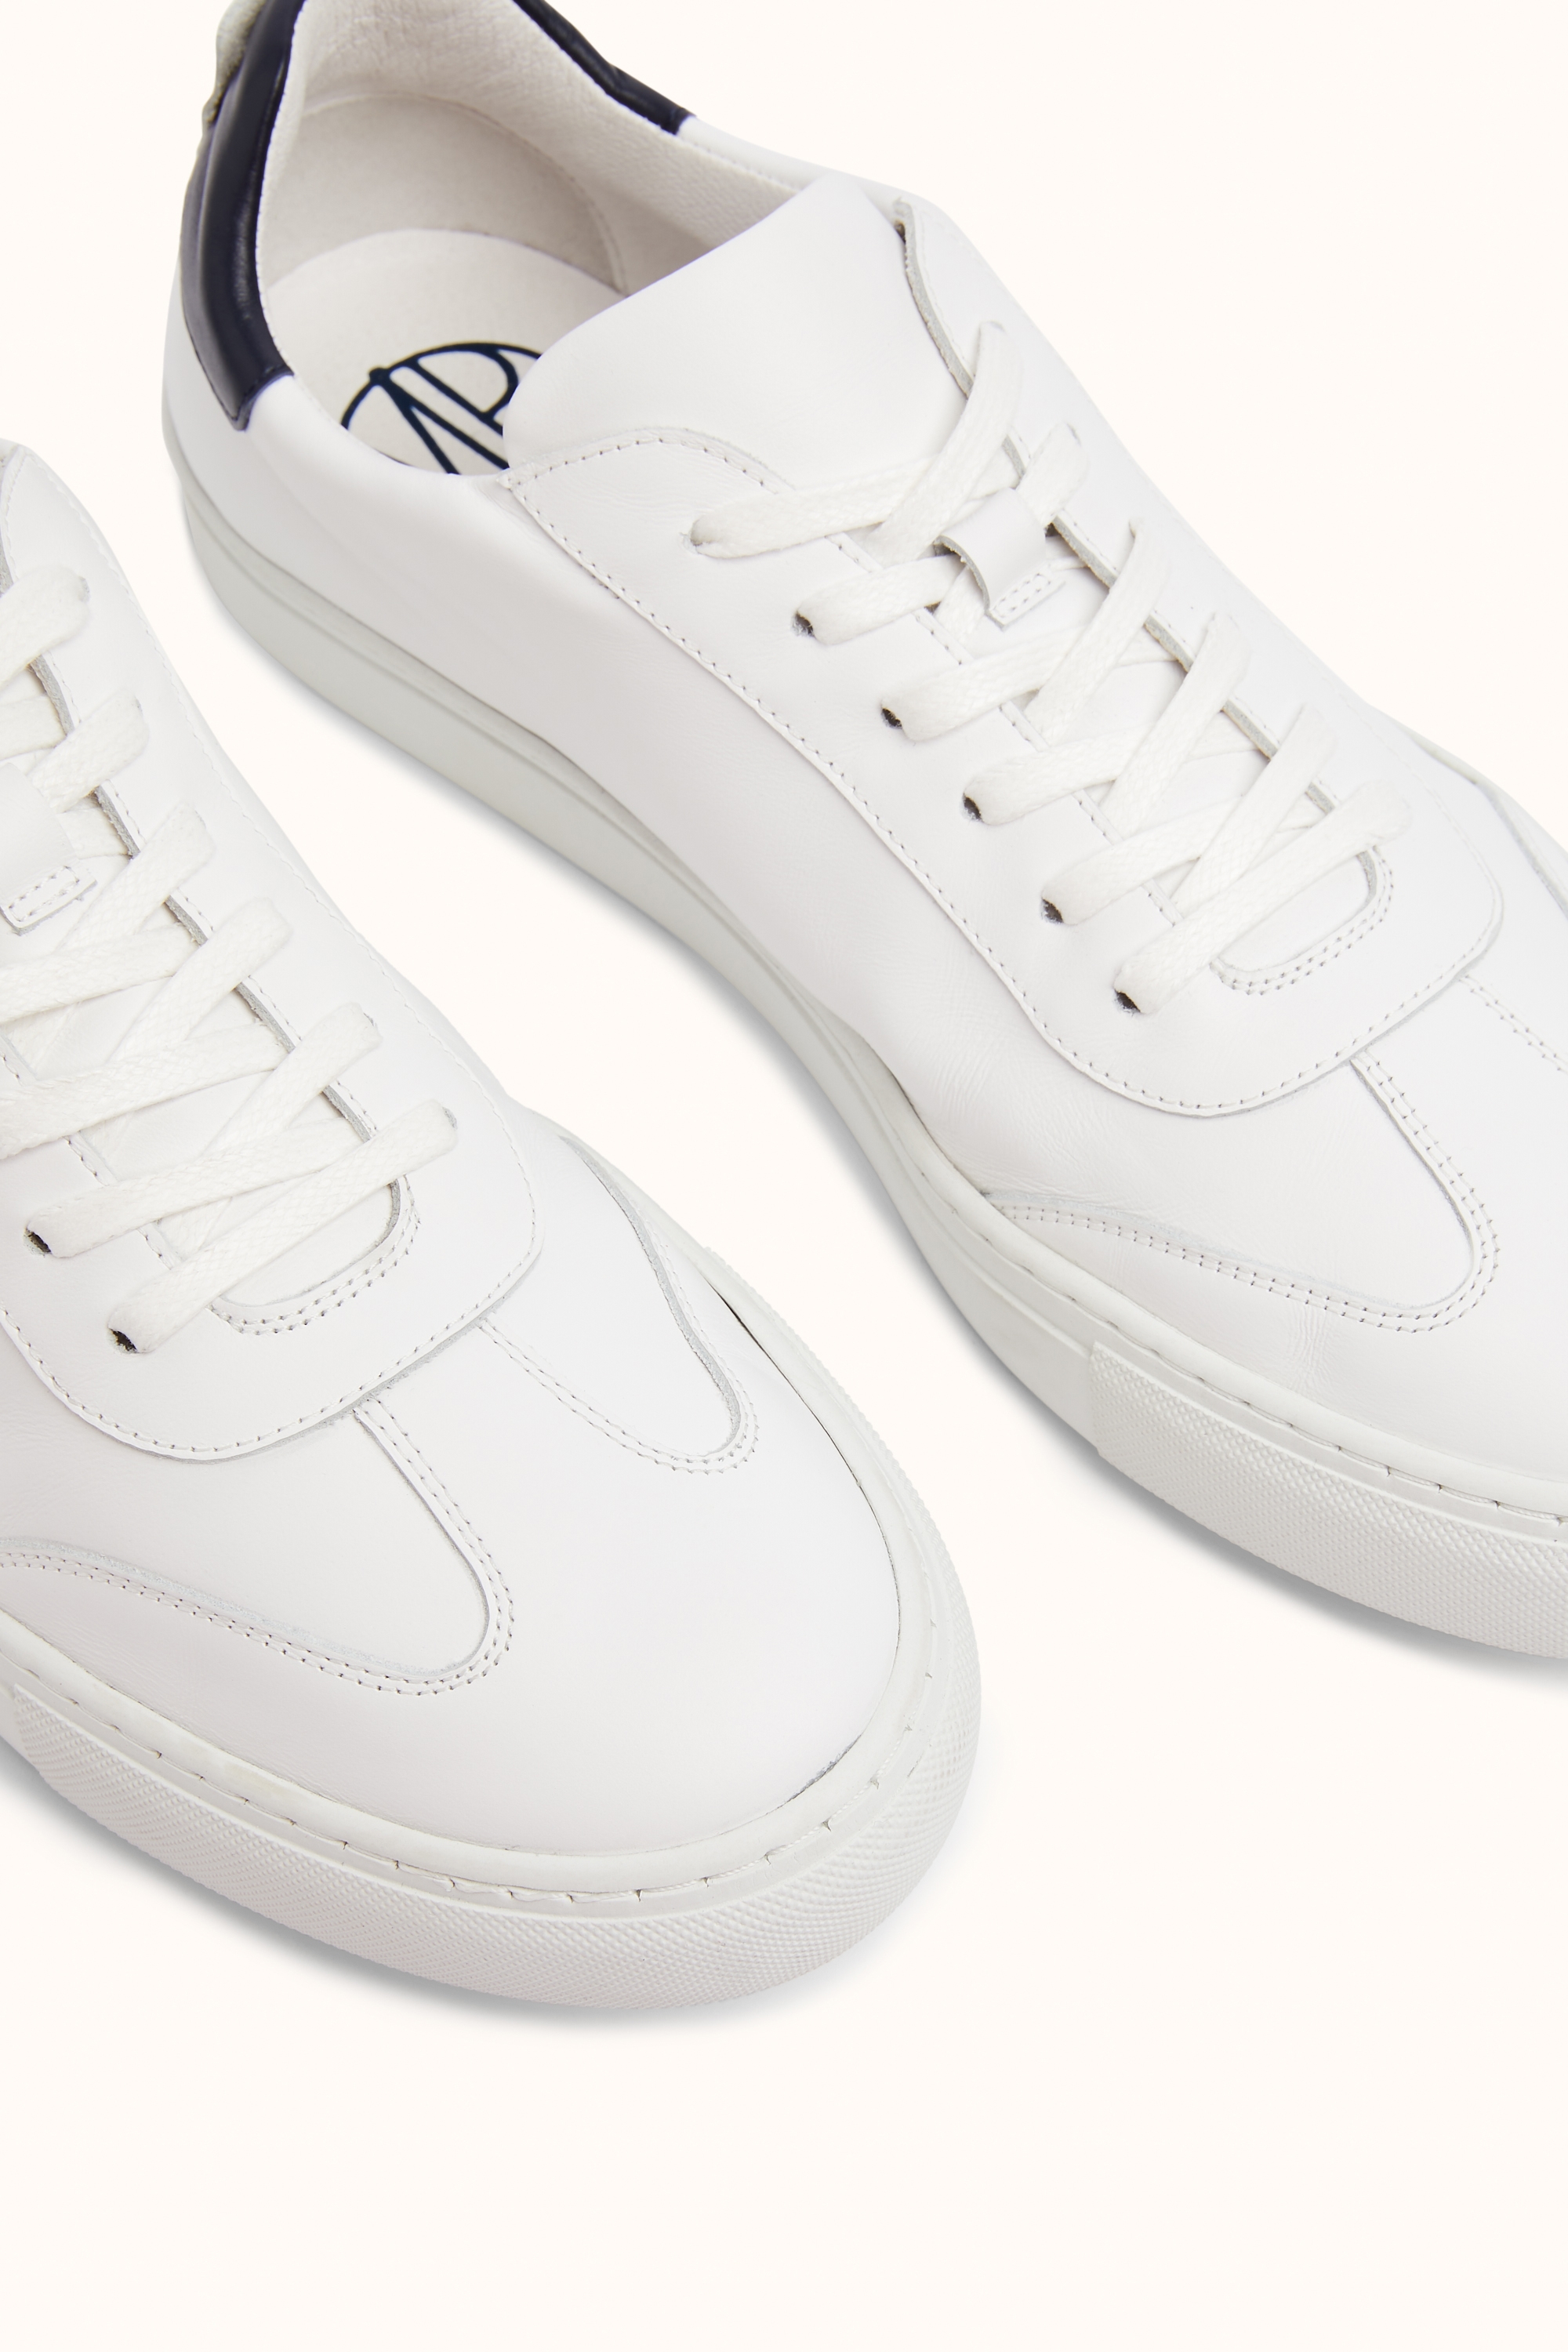 Dalston White Leather Smart Trainers